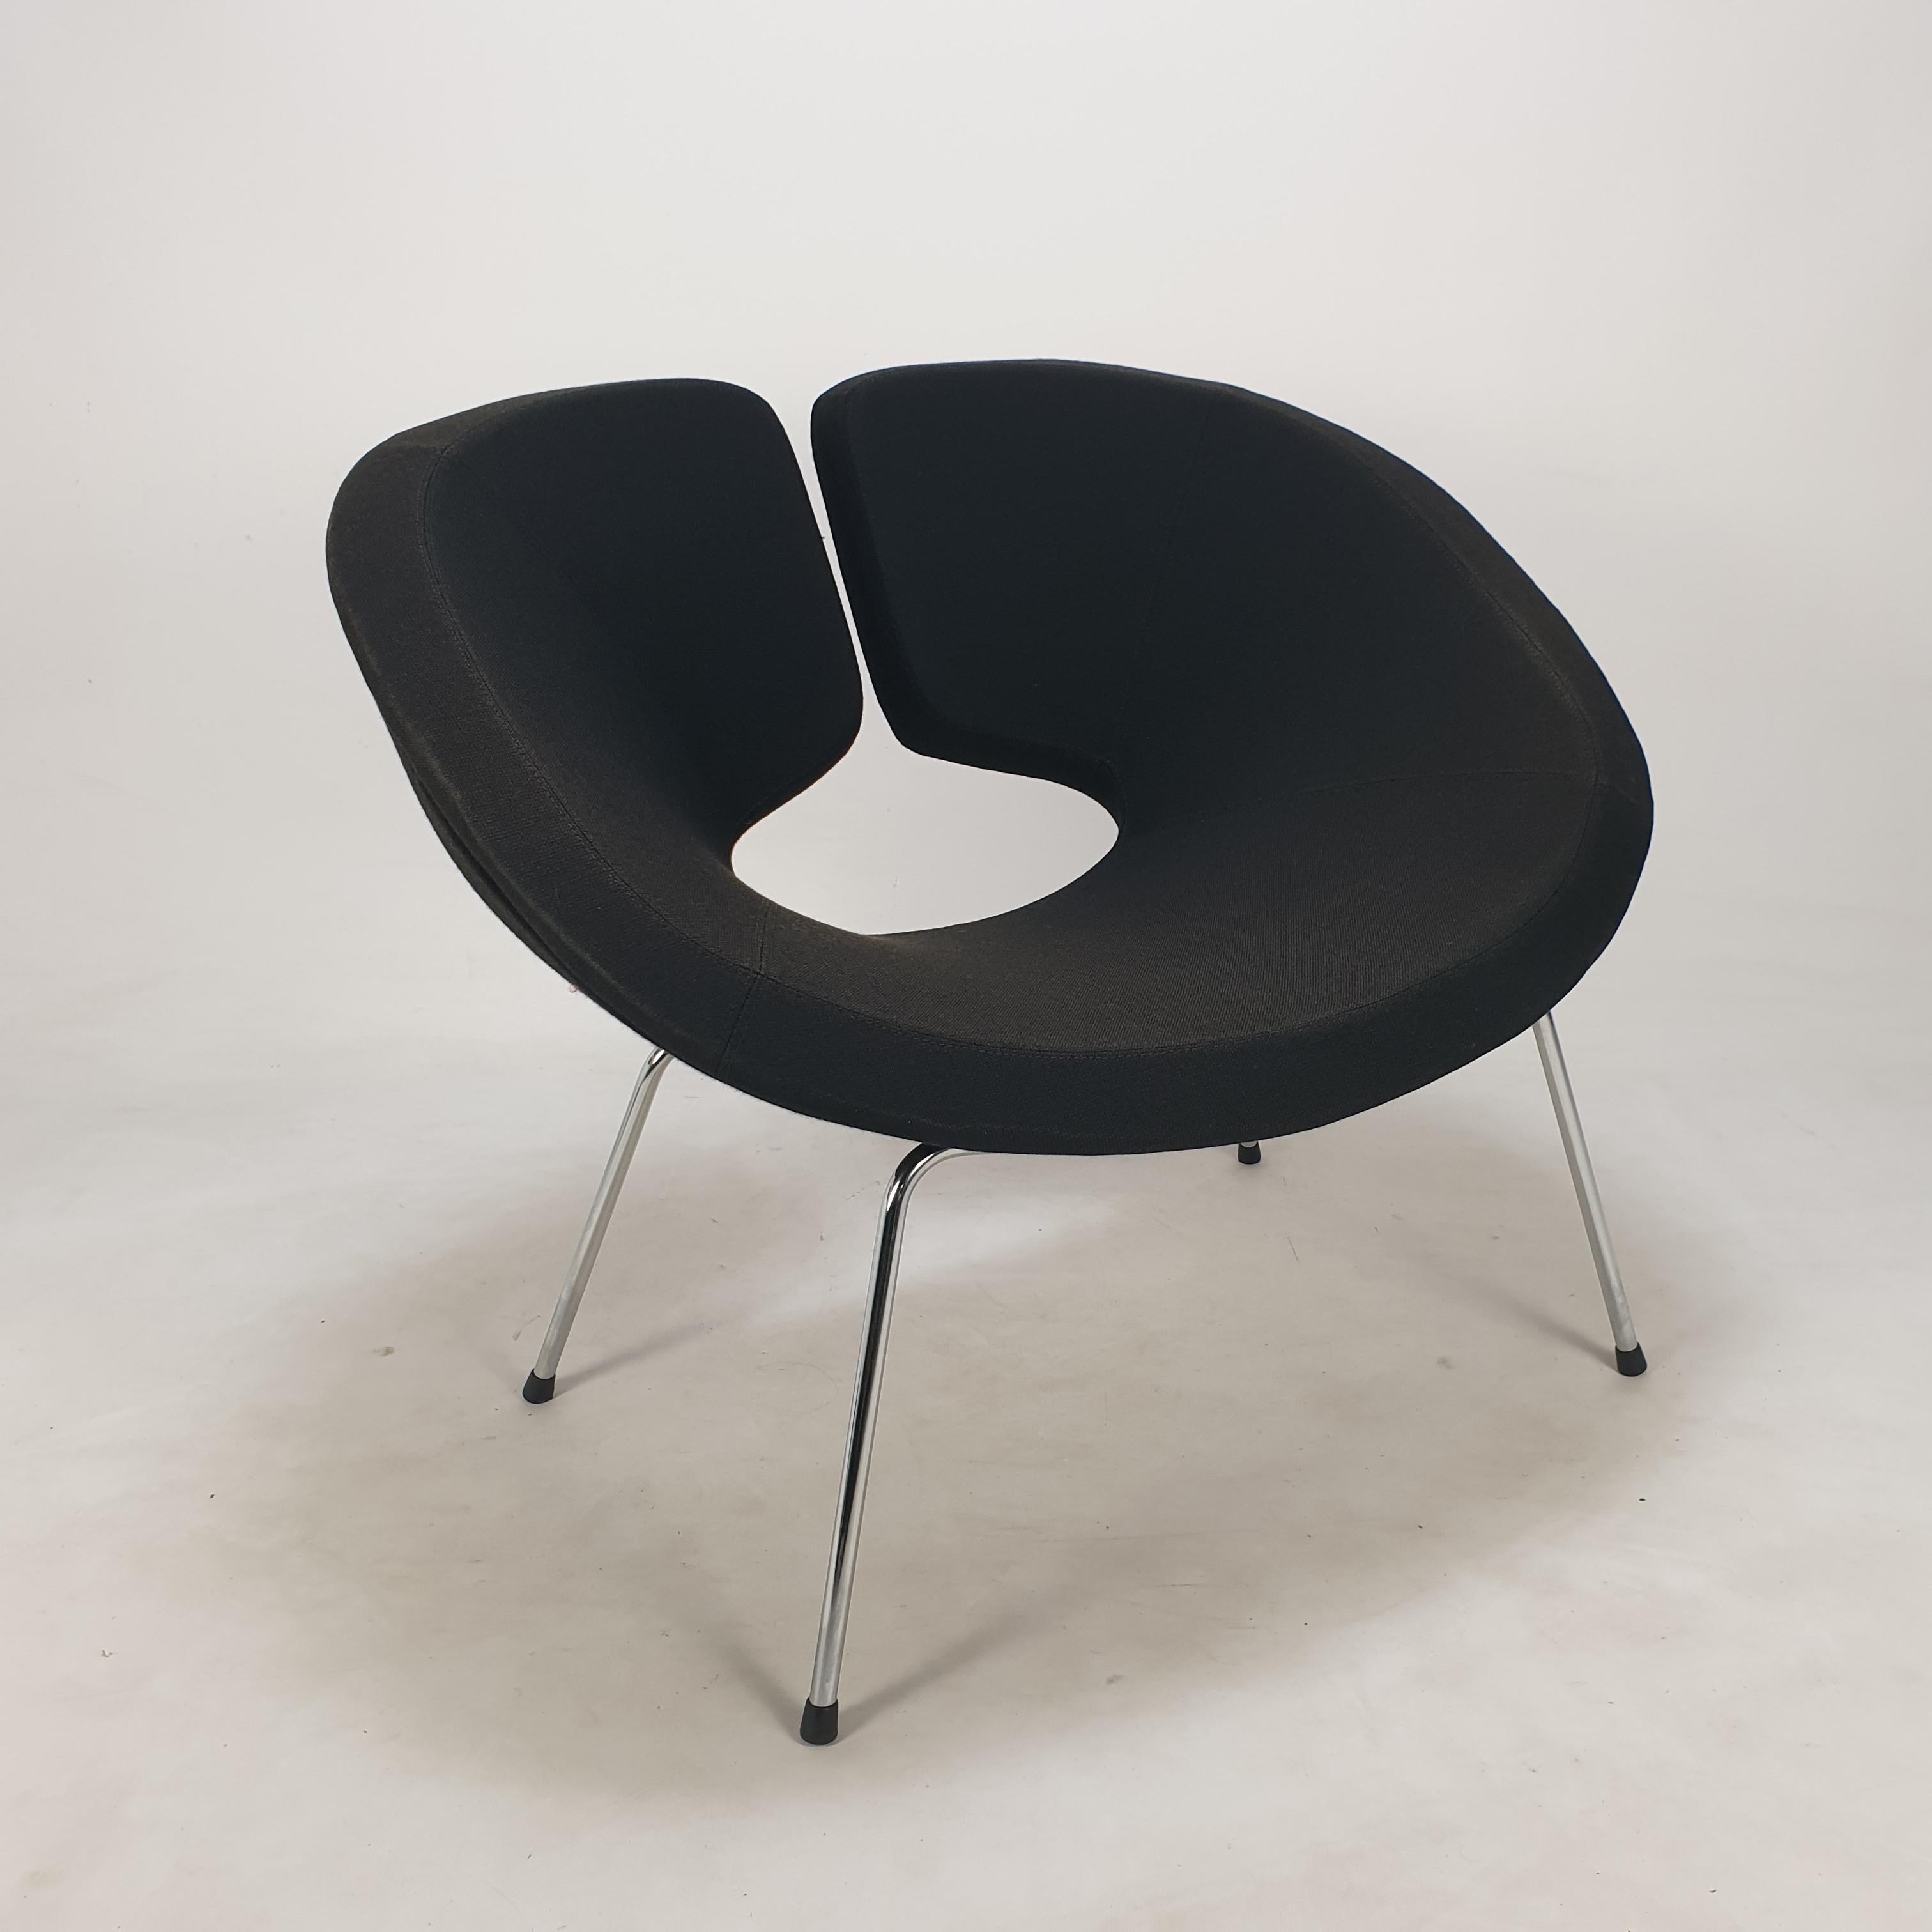 Very nice and comfortable Artifort Apollo Chair, designed by Patrick Norguet in 2002. 

It is covered with the original black Gabriel Fame wool fabric. 

The chair is used, but in very good condition.